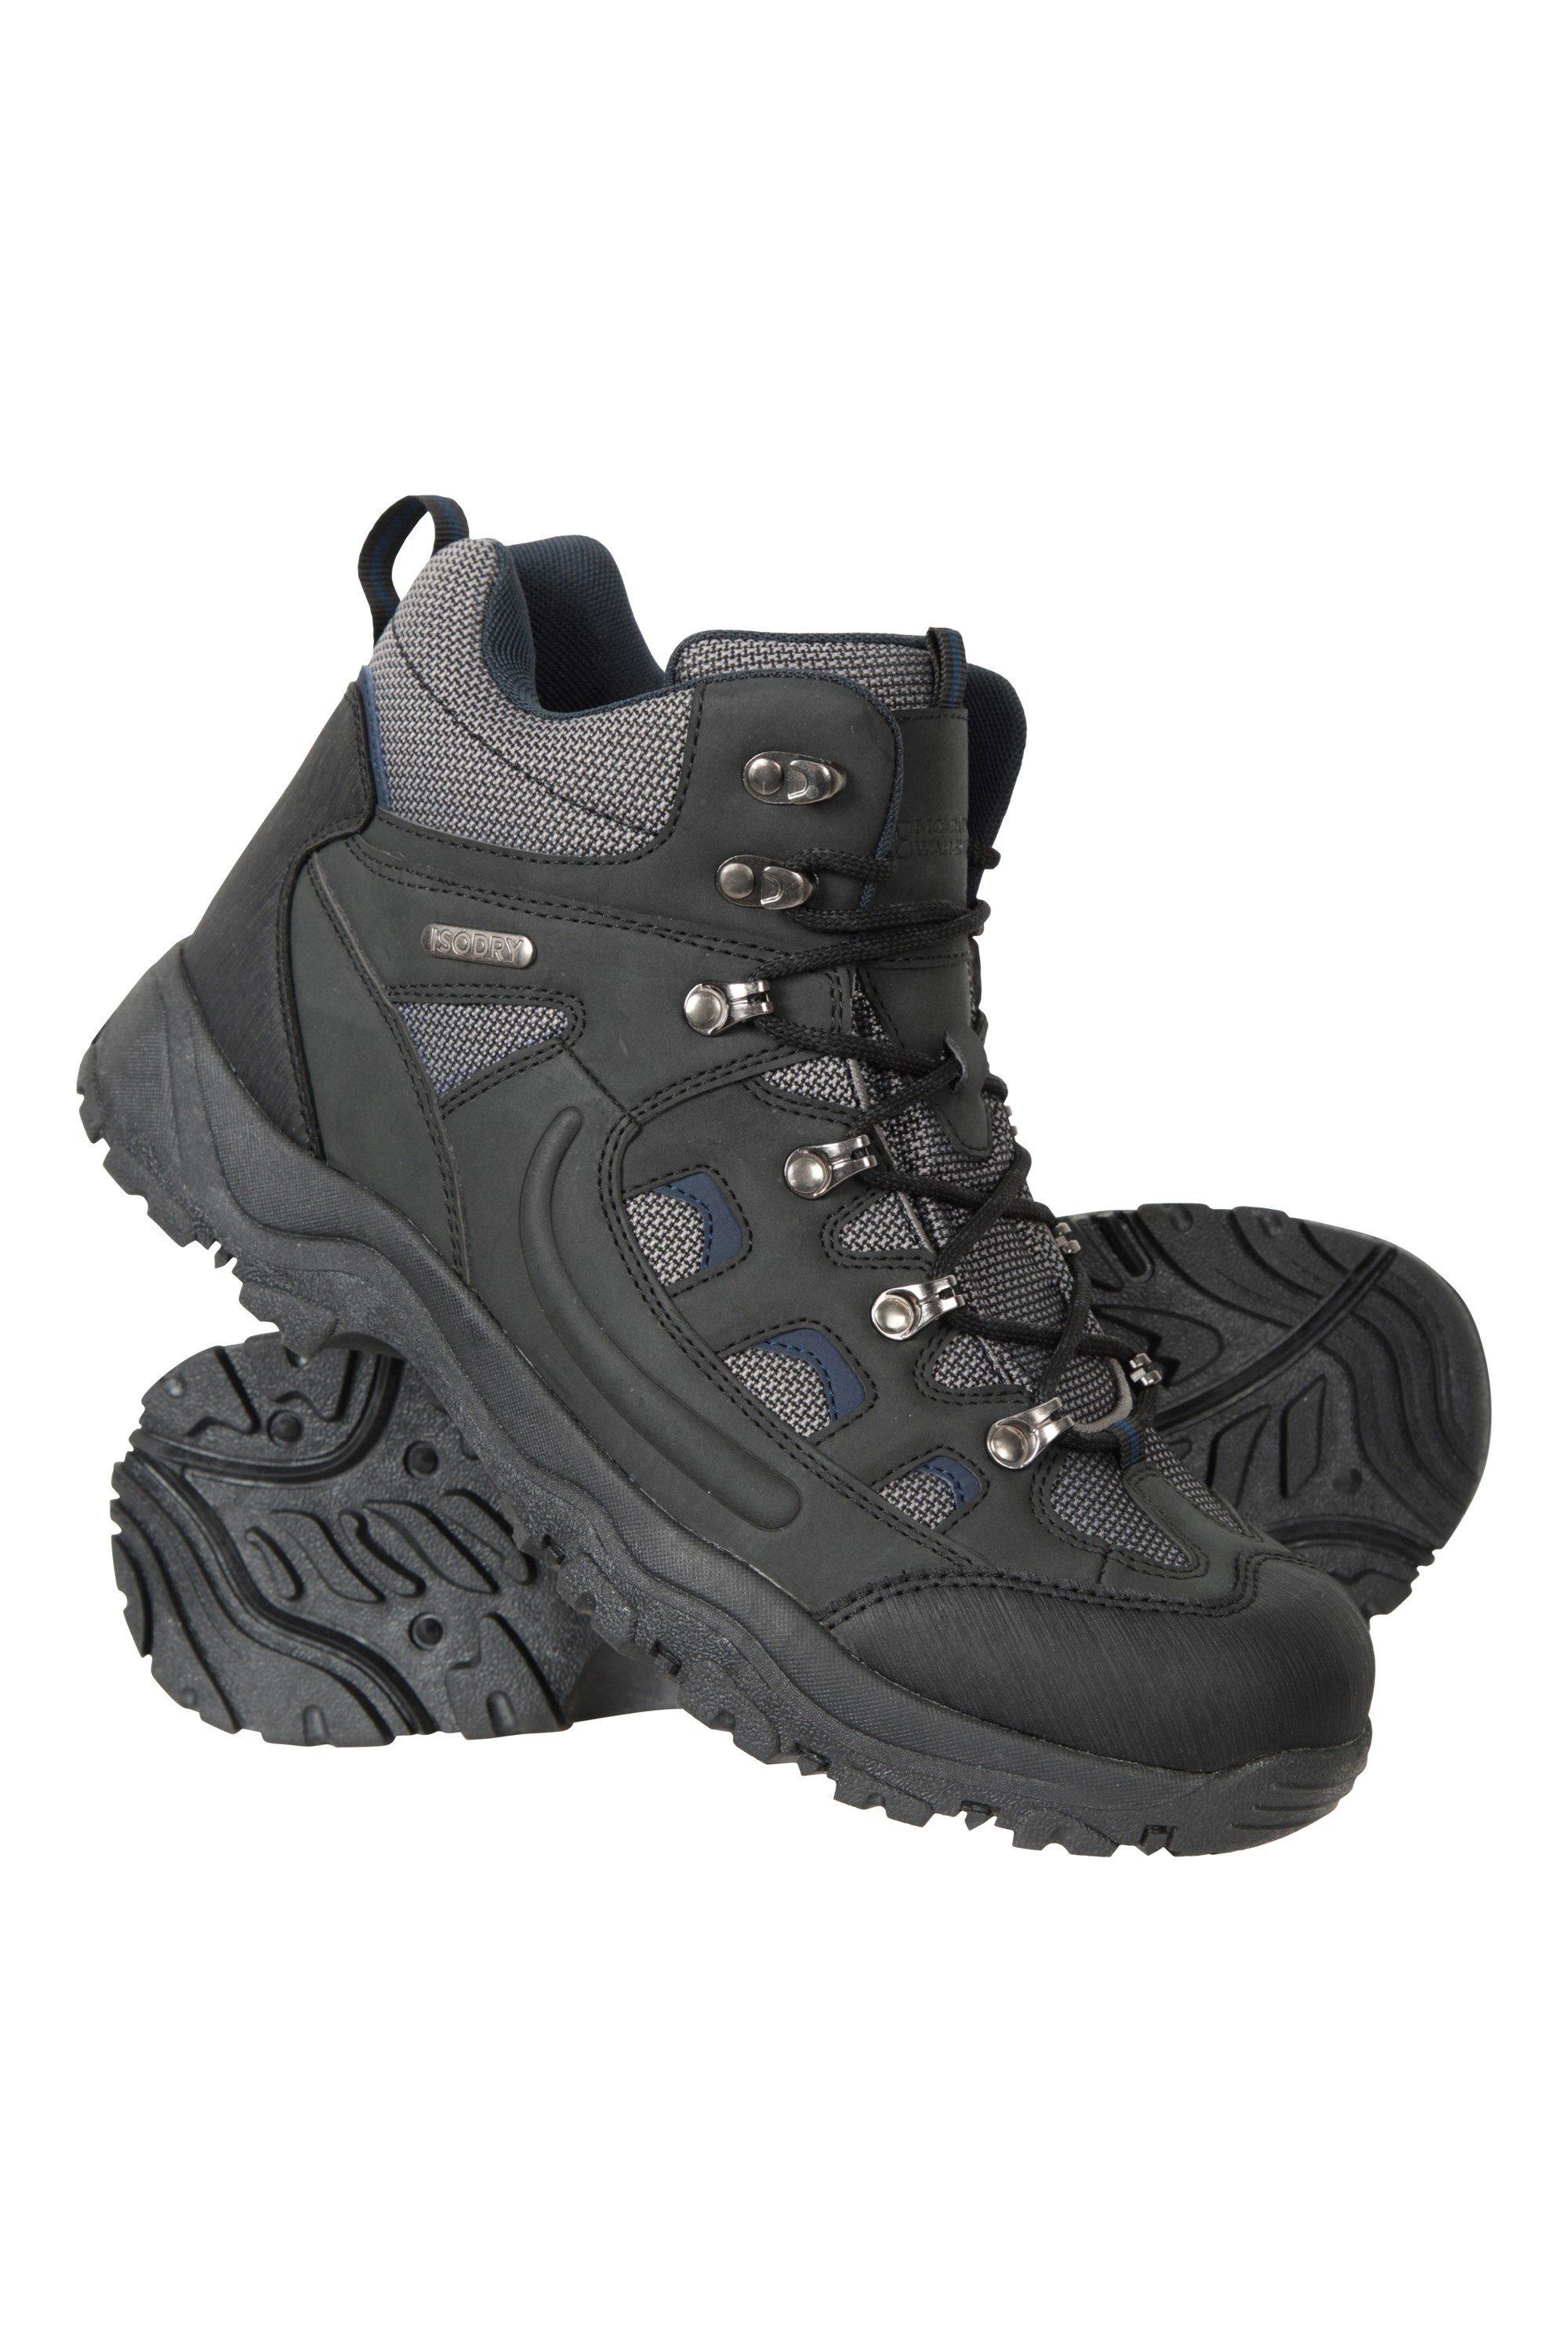 Boots | 'Adventurer' IsoDry Waterproof Breathable Hiking Boots ...